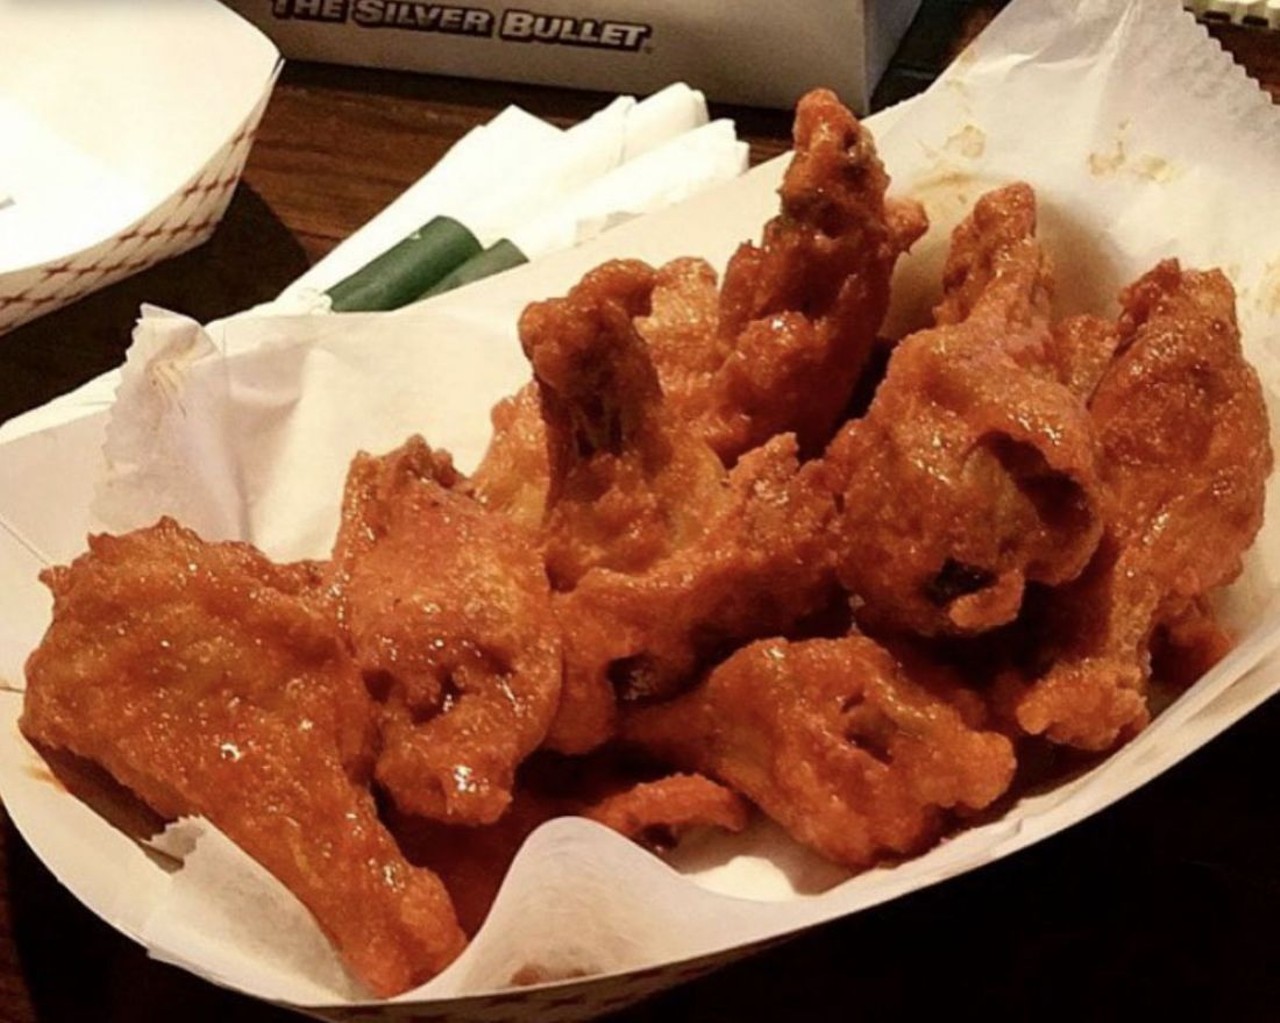  Riverwood Cafe
18500 Detroit Rd., Lakewood
This Lakewood watering hole, known for one of the best happy hours around, is also frequented for their exquisite wings. Try the &#145;Buffalo Garlic&#146; or &#145;Sweet Heat&#146; for that extra kick.
Photo via @RiverwoodCafeLakewood/Instagram